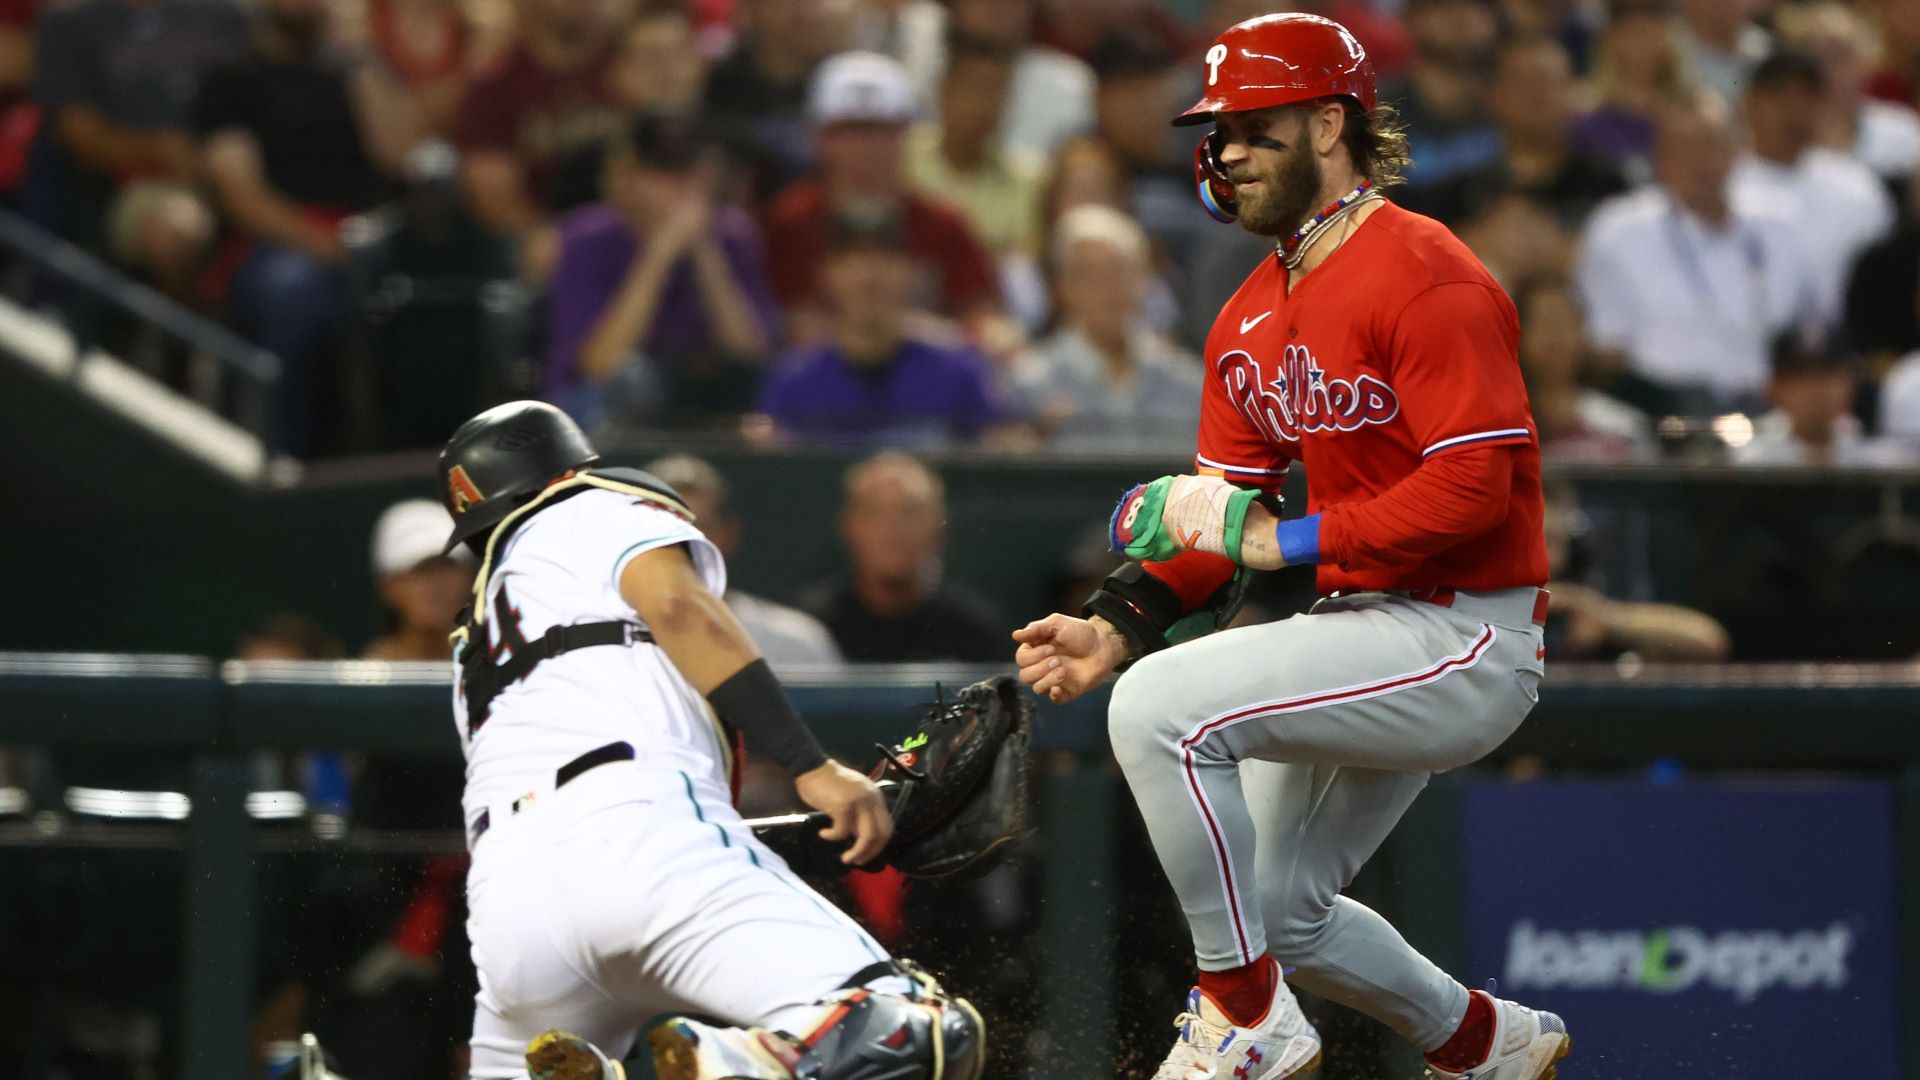 Angels vs. Phillies MLB 2022 live stream (6/4) How to watch online